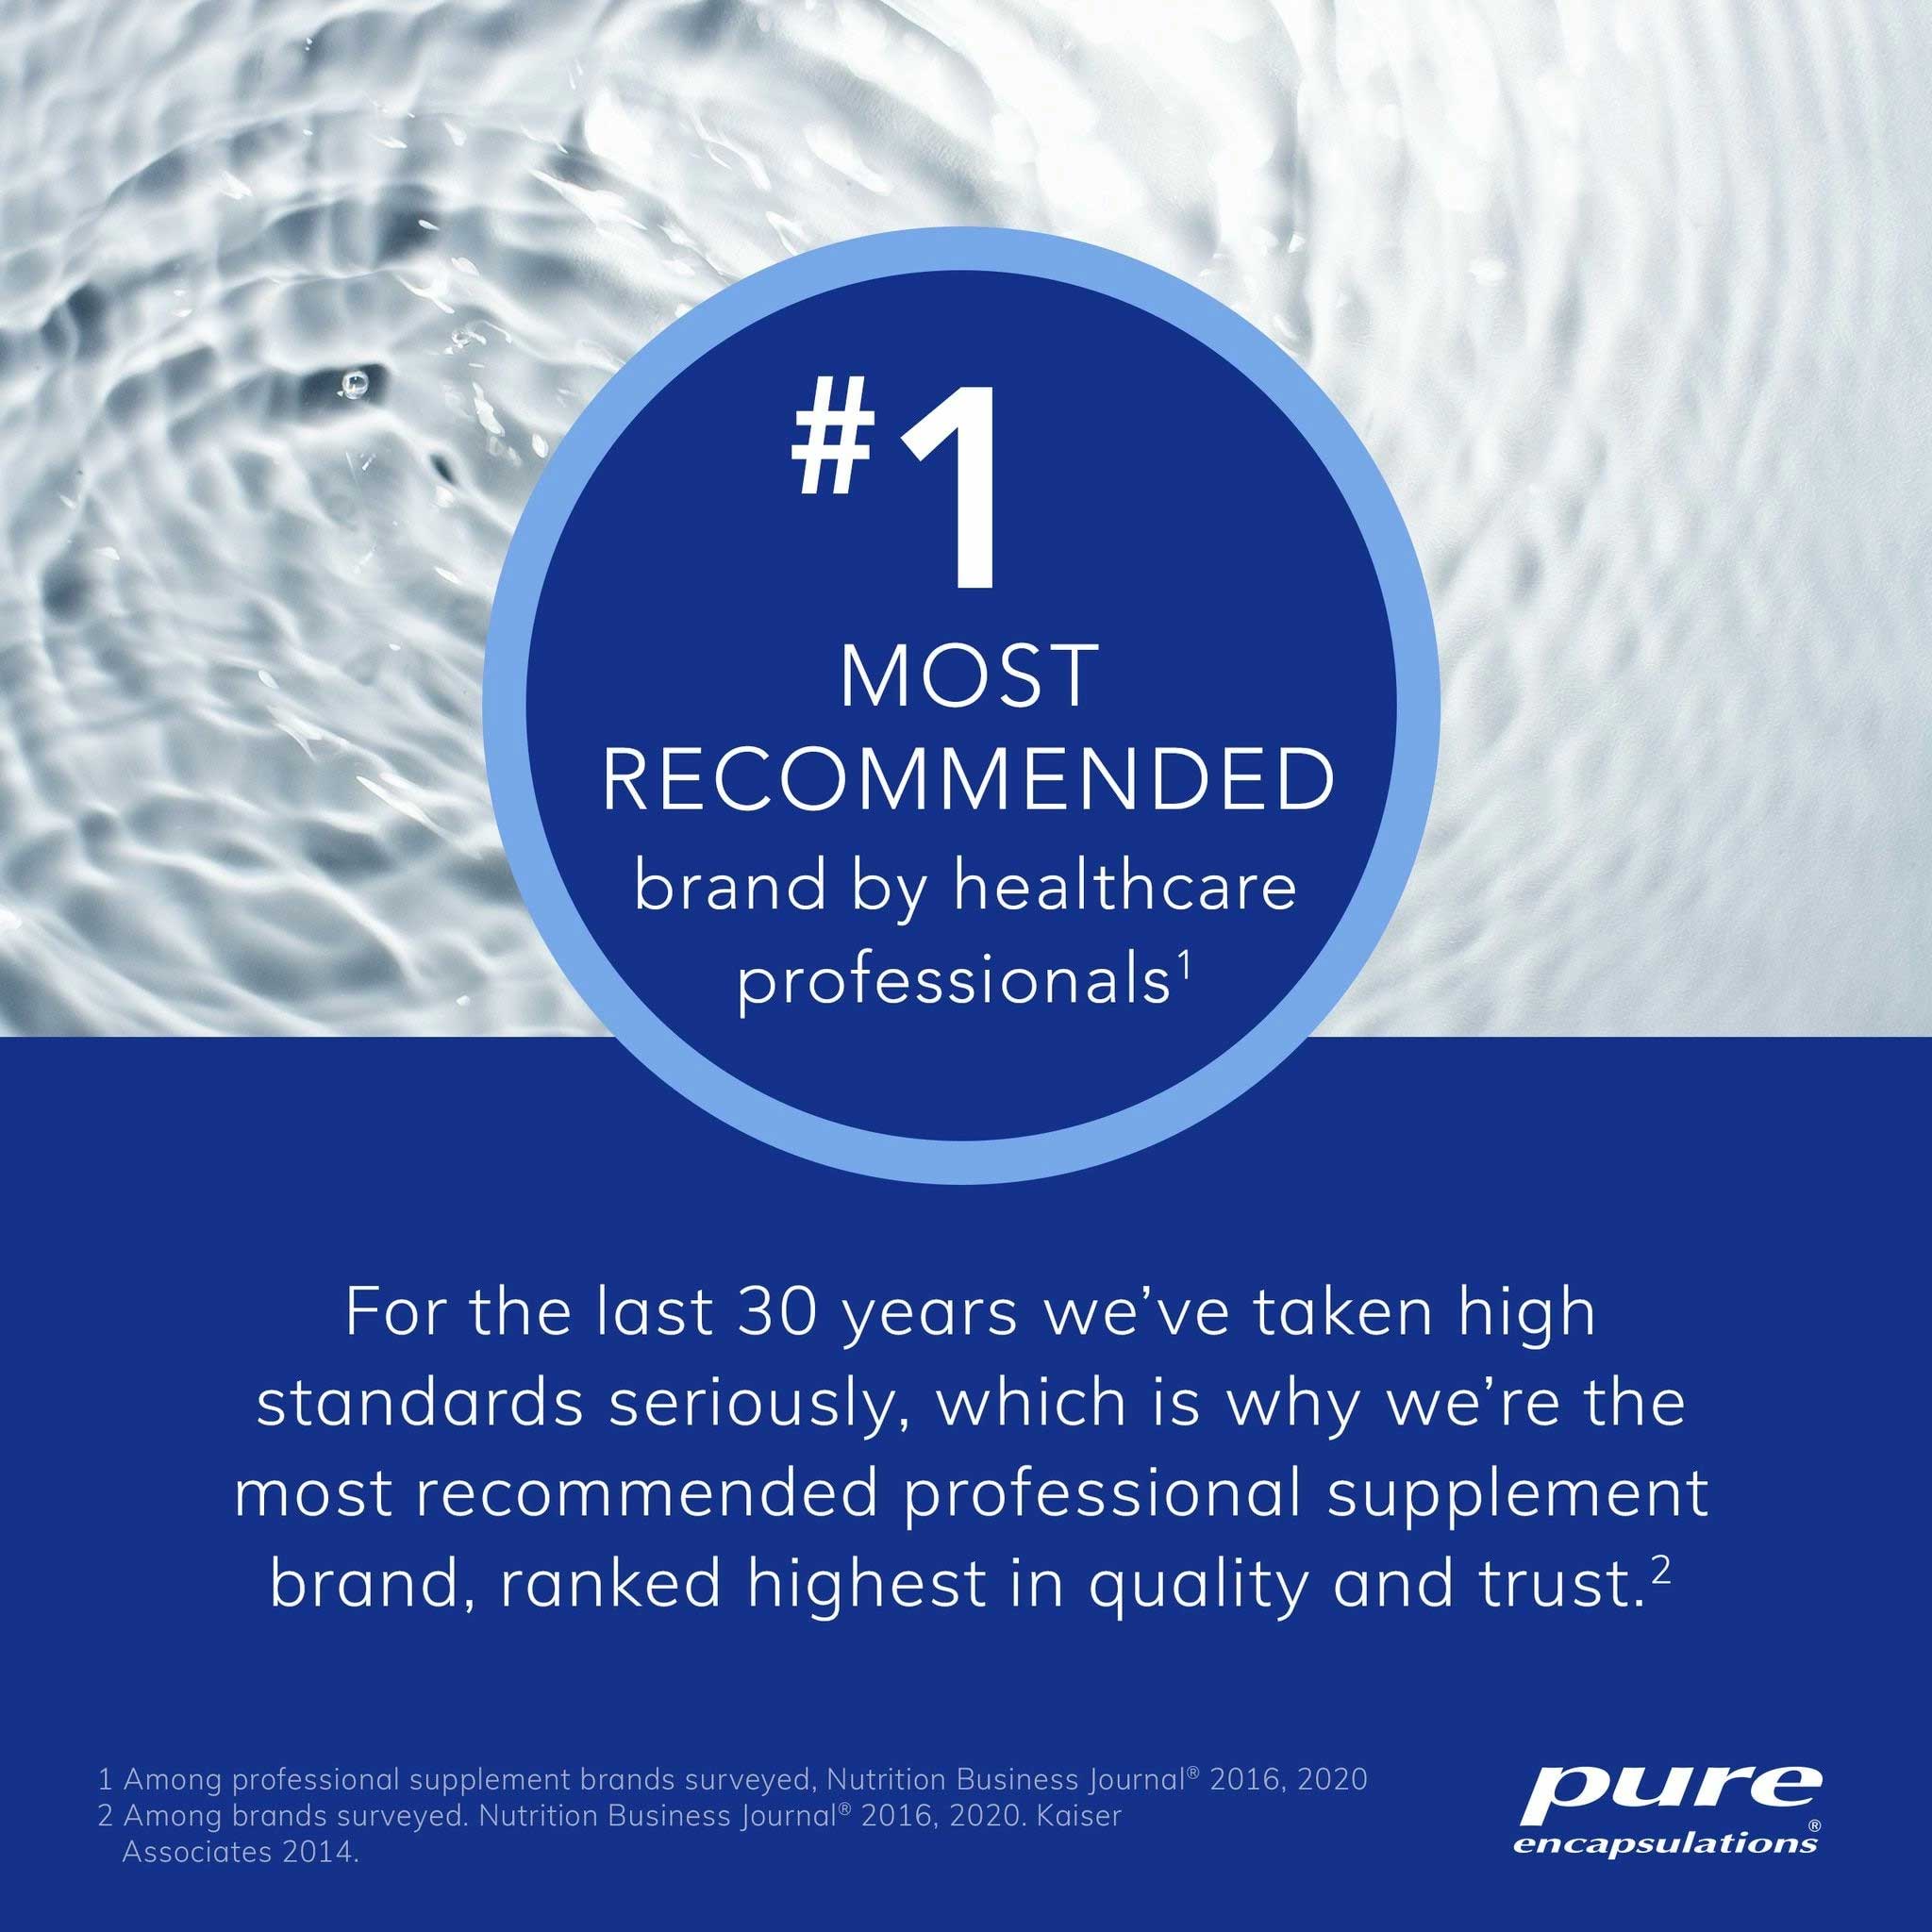 Pure Encapsulations Sleep Solution (single dose liquid) Most Recommended Brand